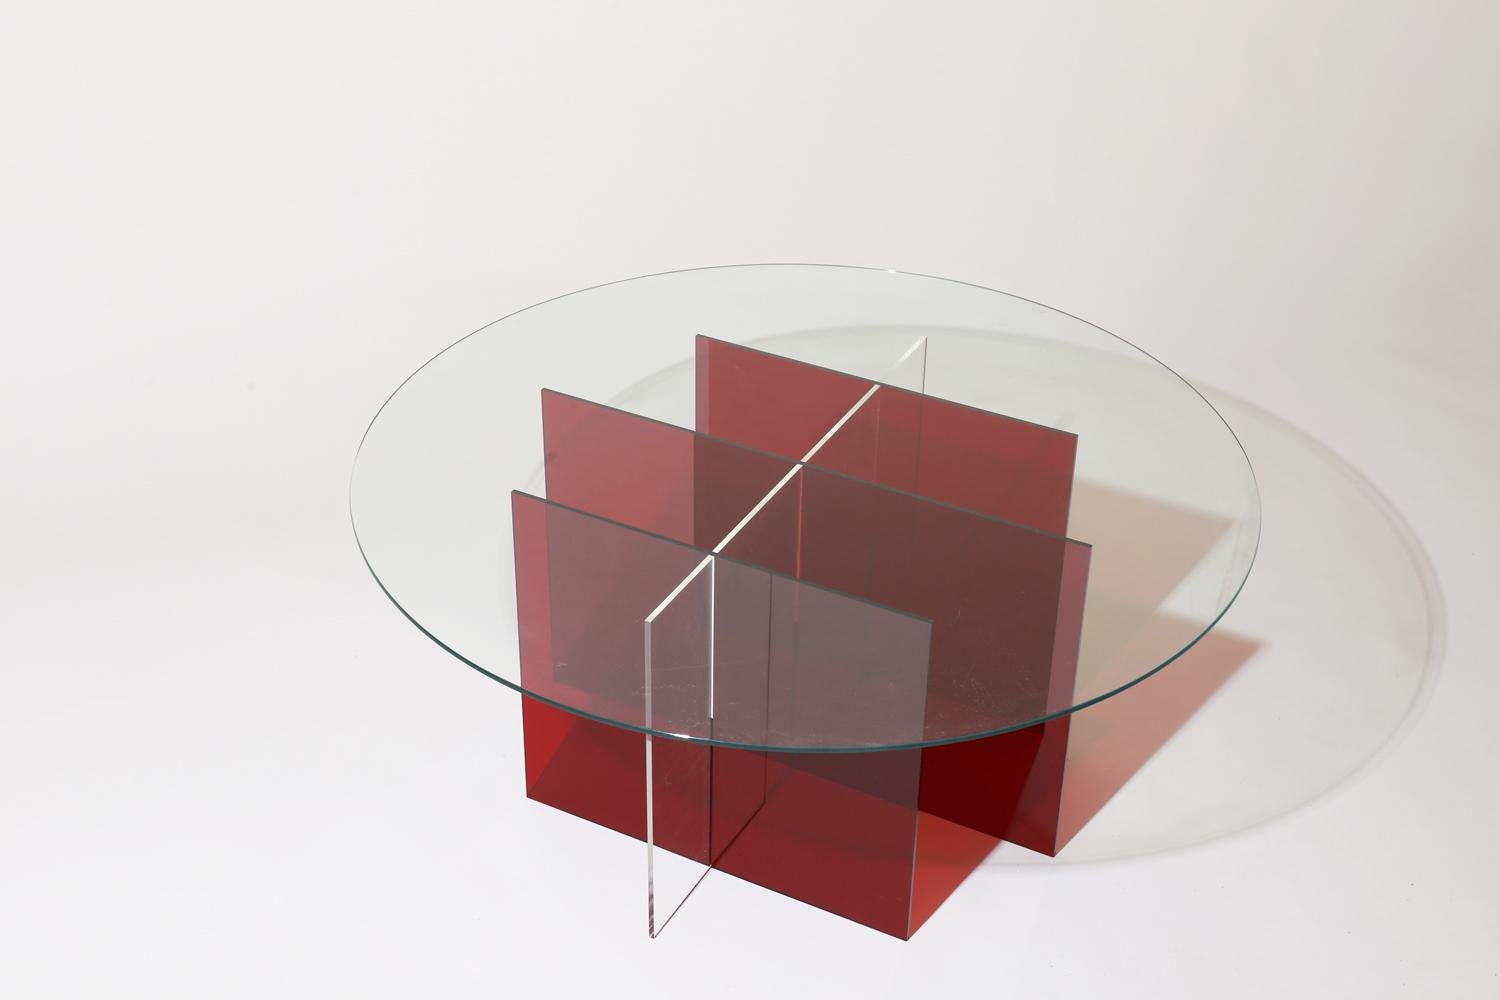 Made to order. Please allow 6 weeks for production.

The Sundial coffee table is an experiential furniture piece, with distinct profiles and playful interaction with light and shadow. The table appears paper thin from one angle and then the full